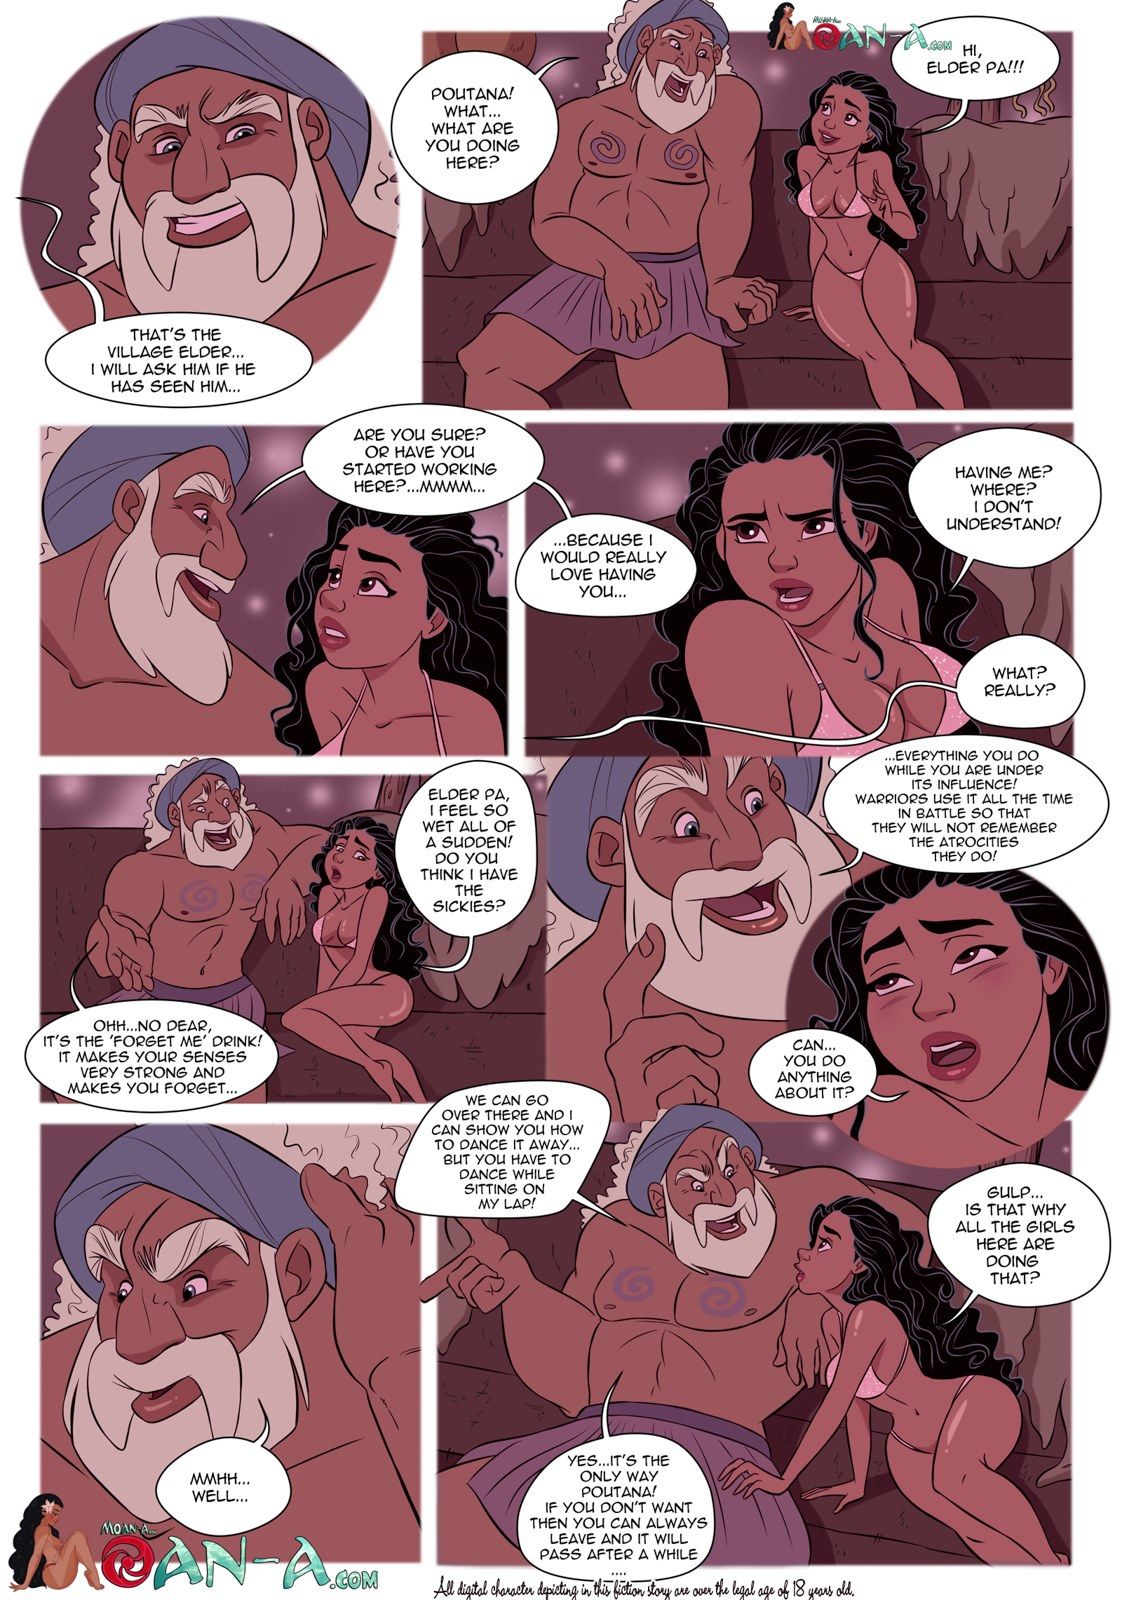 Moan-a- Let a Moan 2 page 1